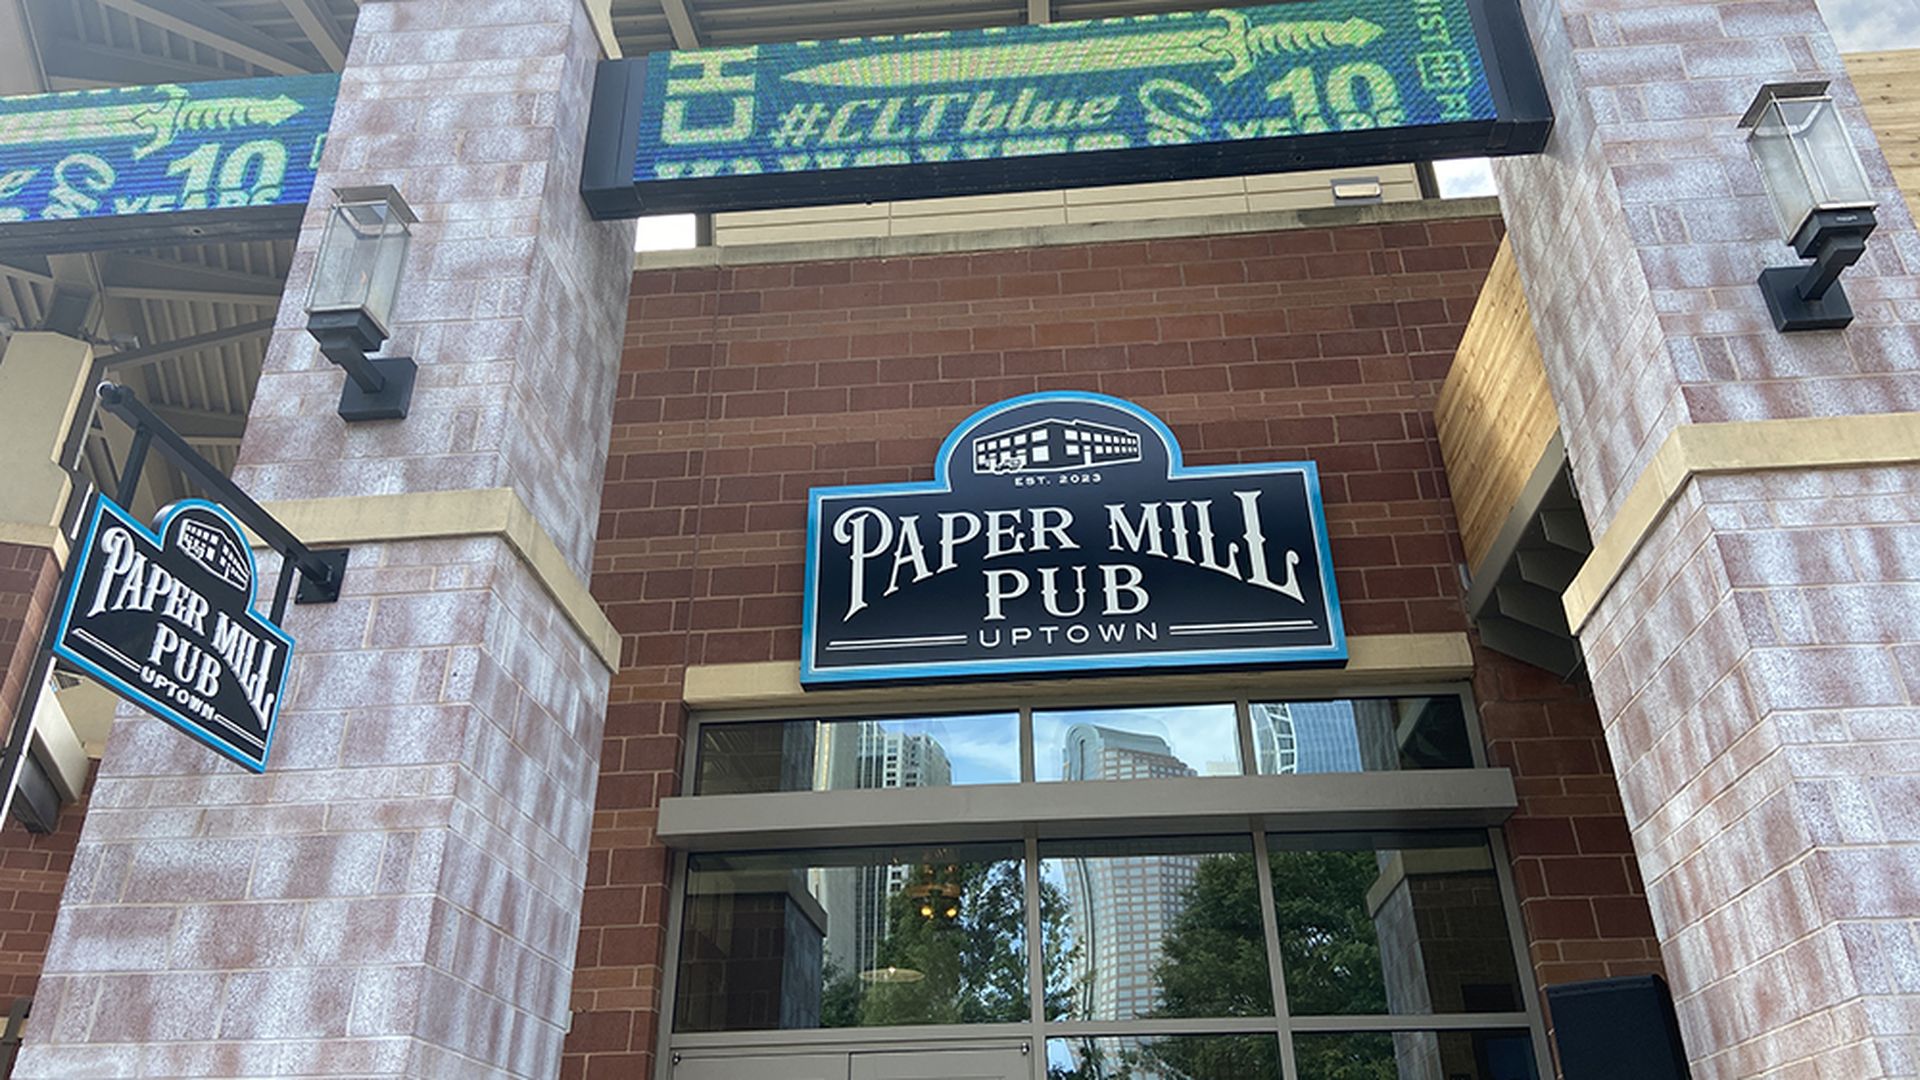 The entrance to Paper Mill Pub off Mint Street. Photo: Ashley Mahoney/Axios